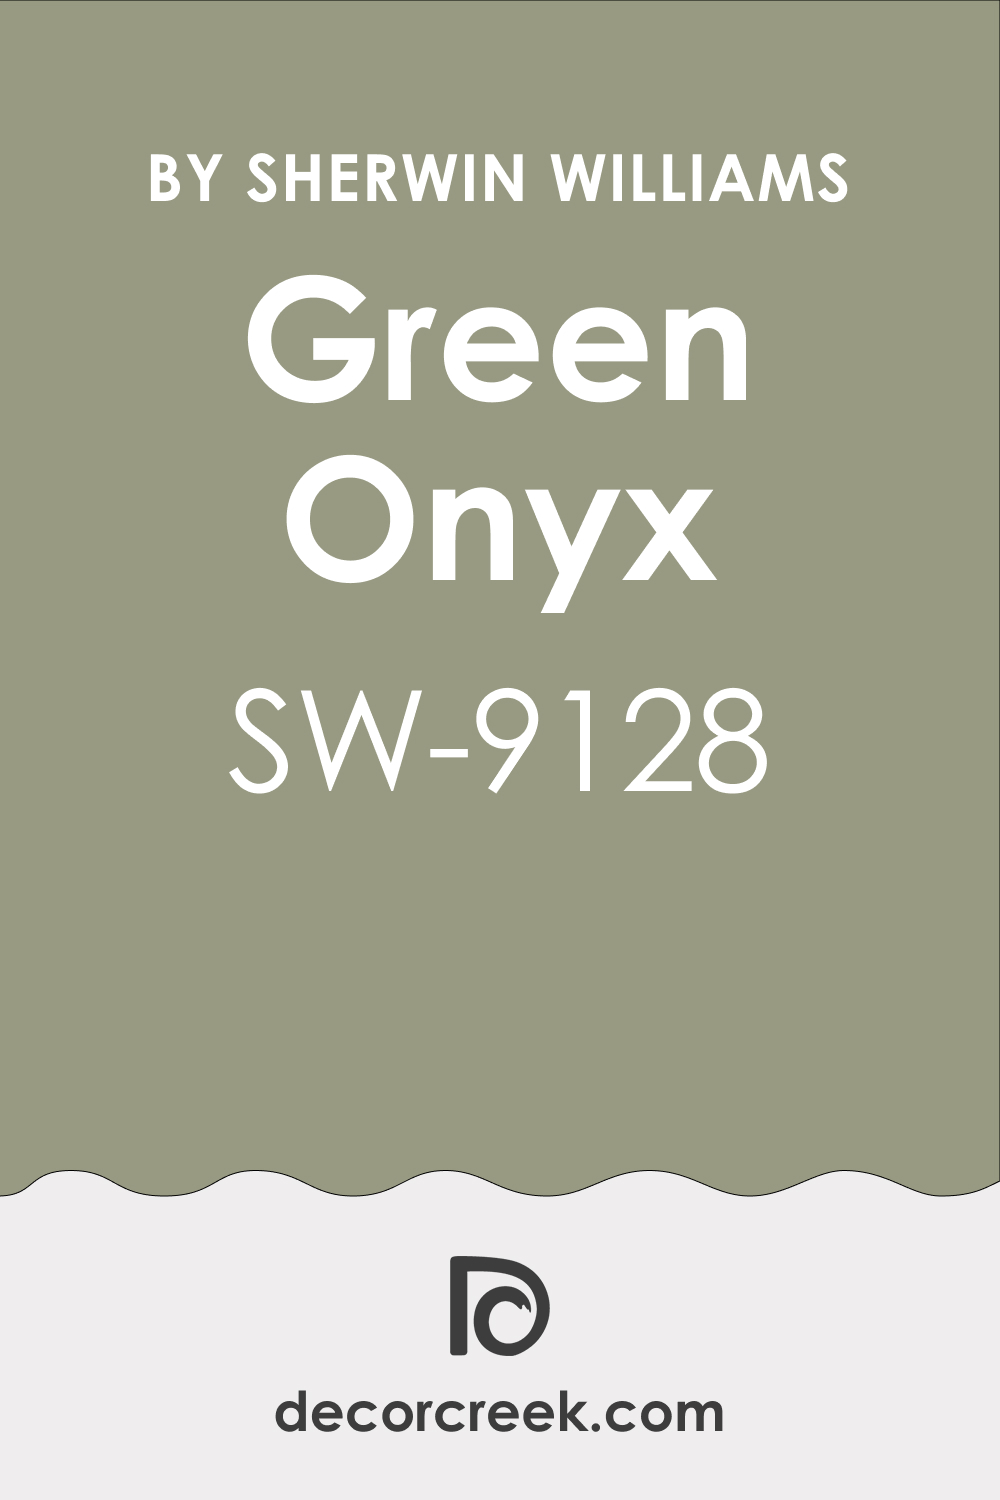 What Kind of Color Is Green Onyx SW 9128?